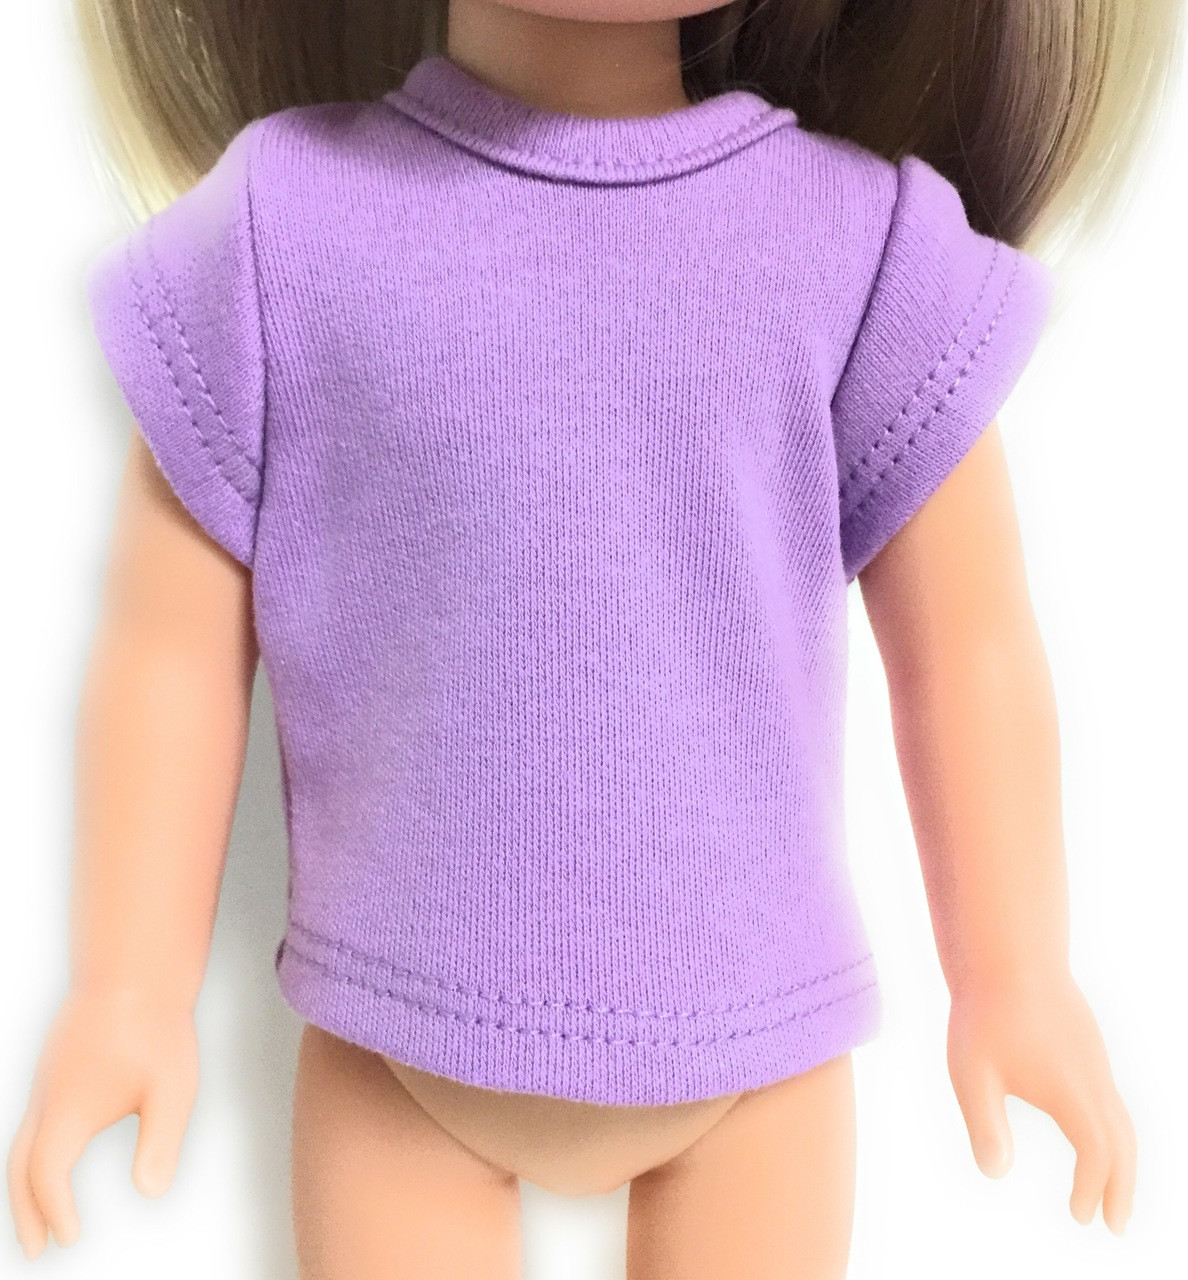 Capped Sleeved Knit Top Lavender For Wellie Wishers Dolls Dori S Doll Boutique